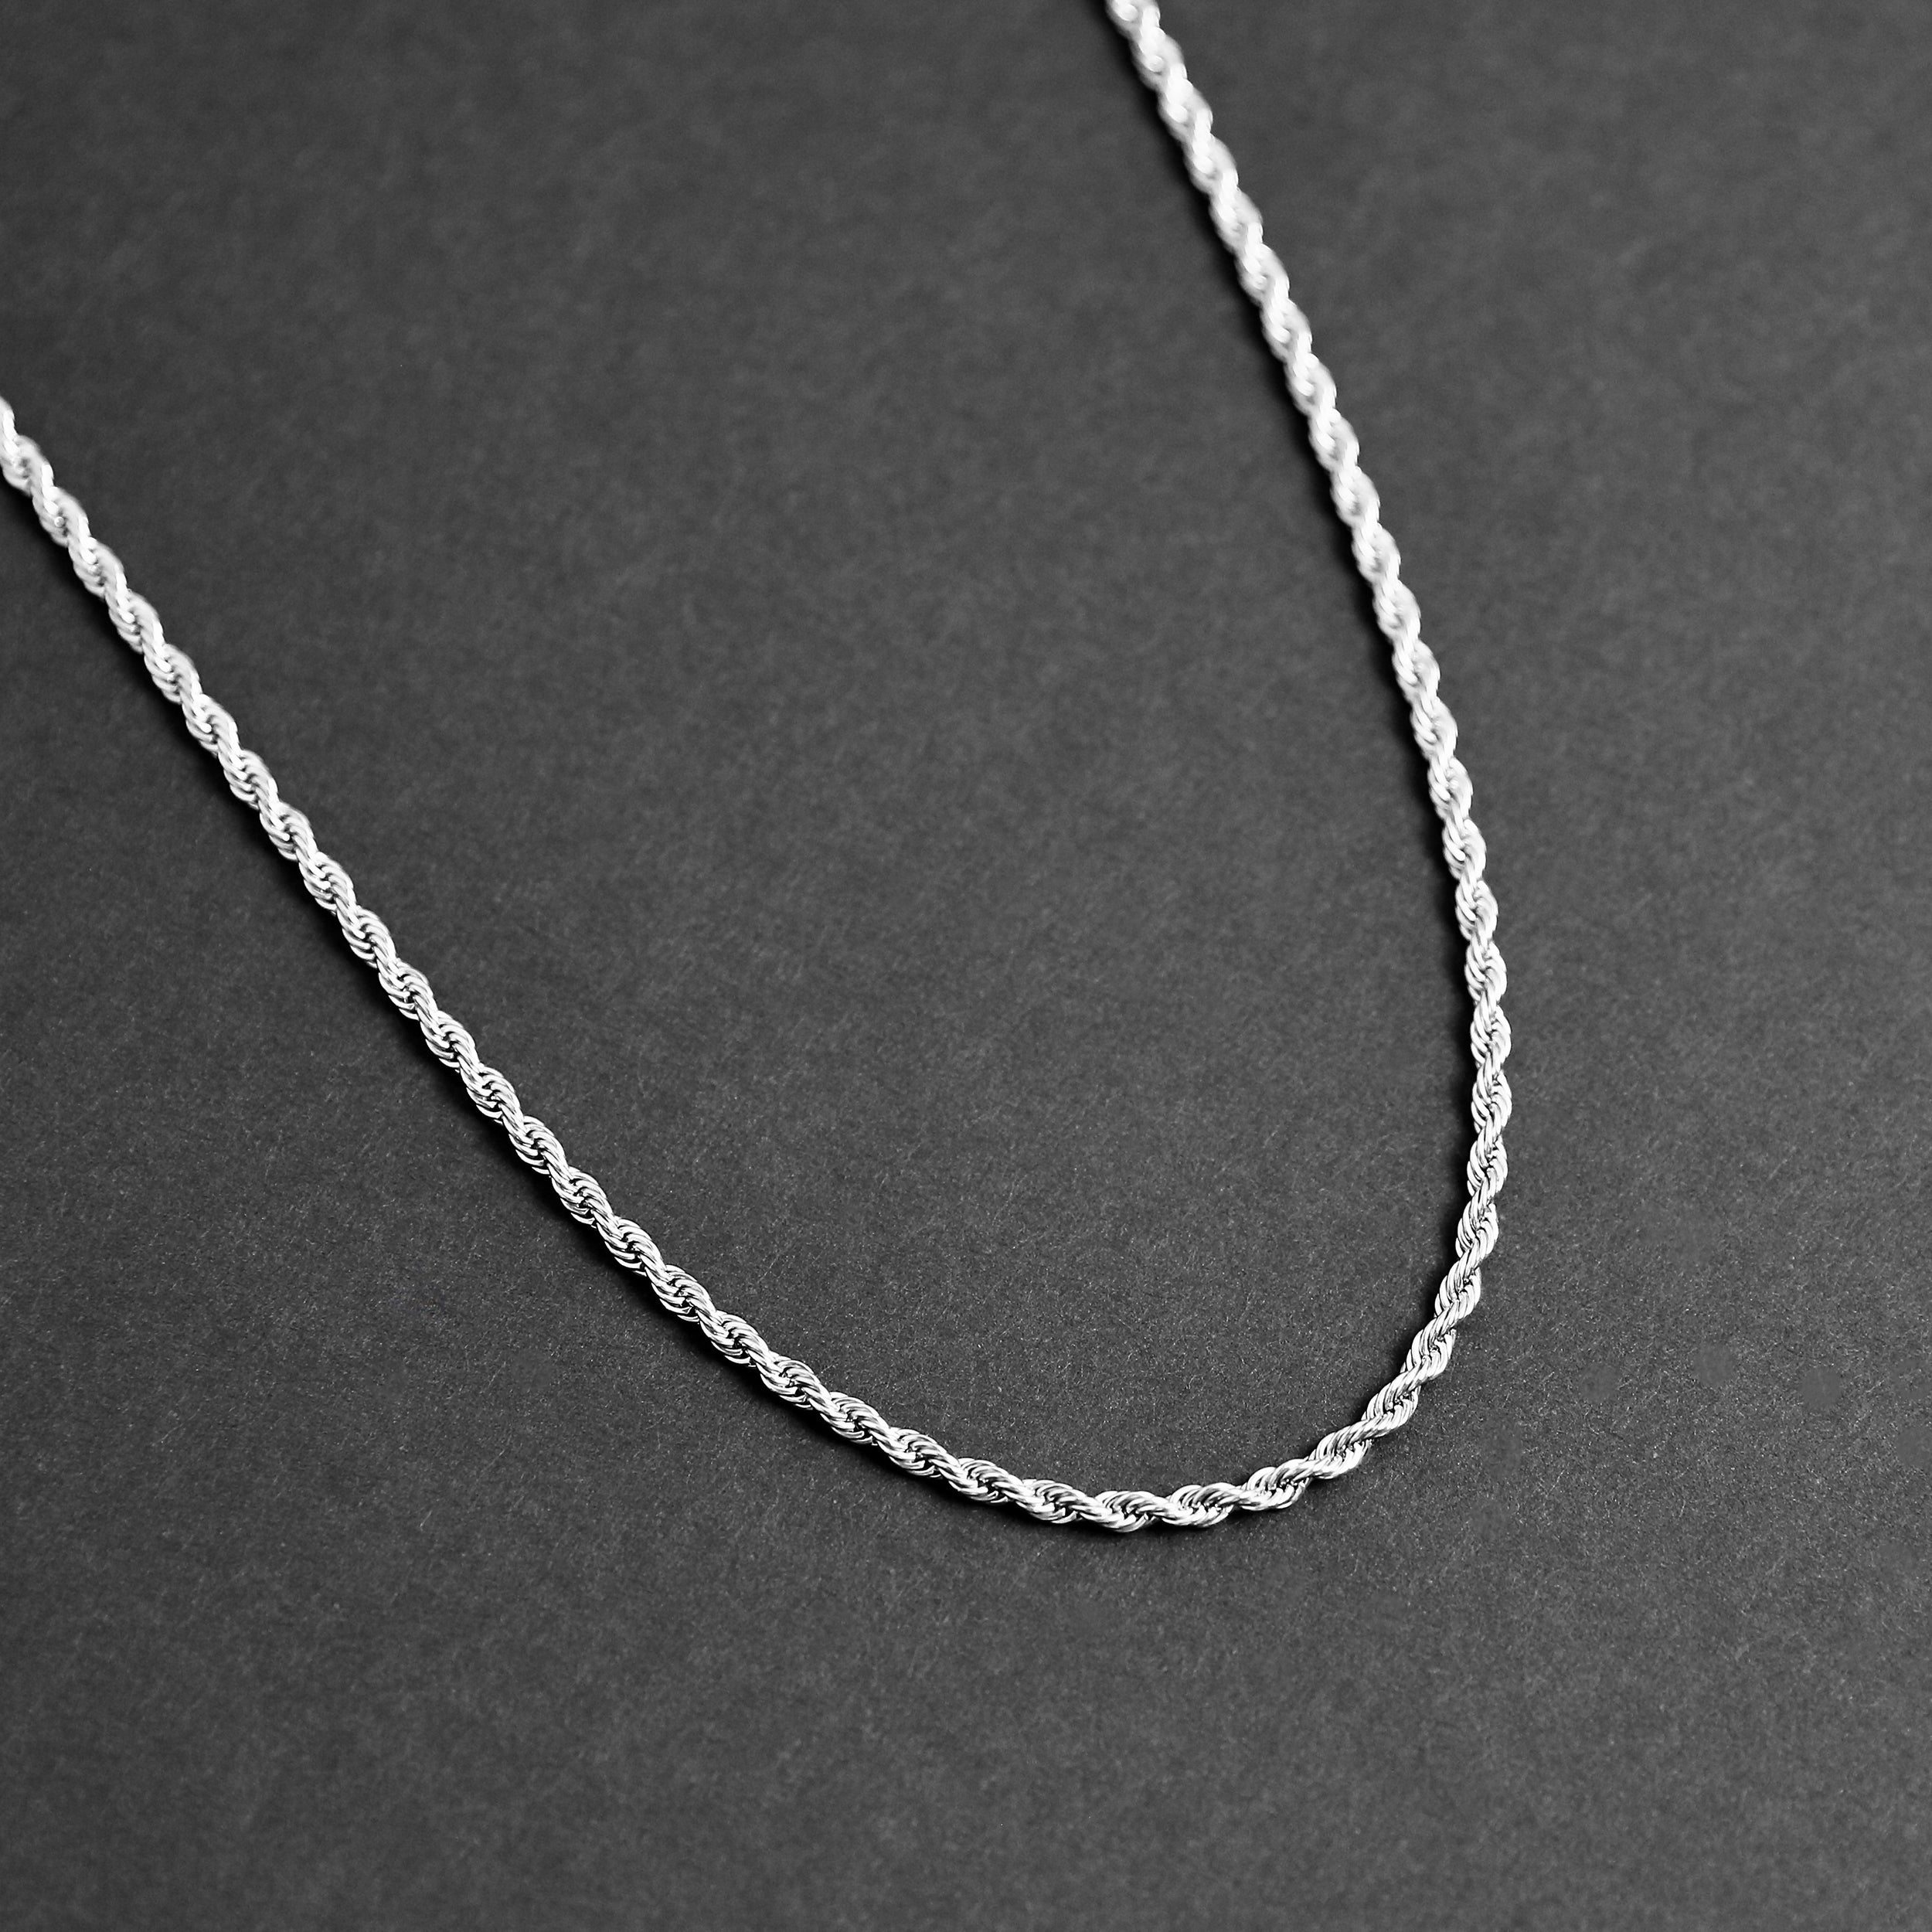 Rope Chain Necklace - Silver 2.8mm